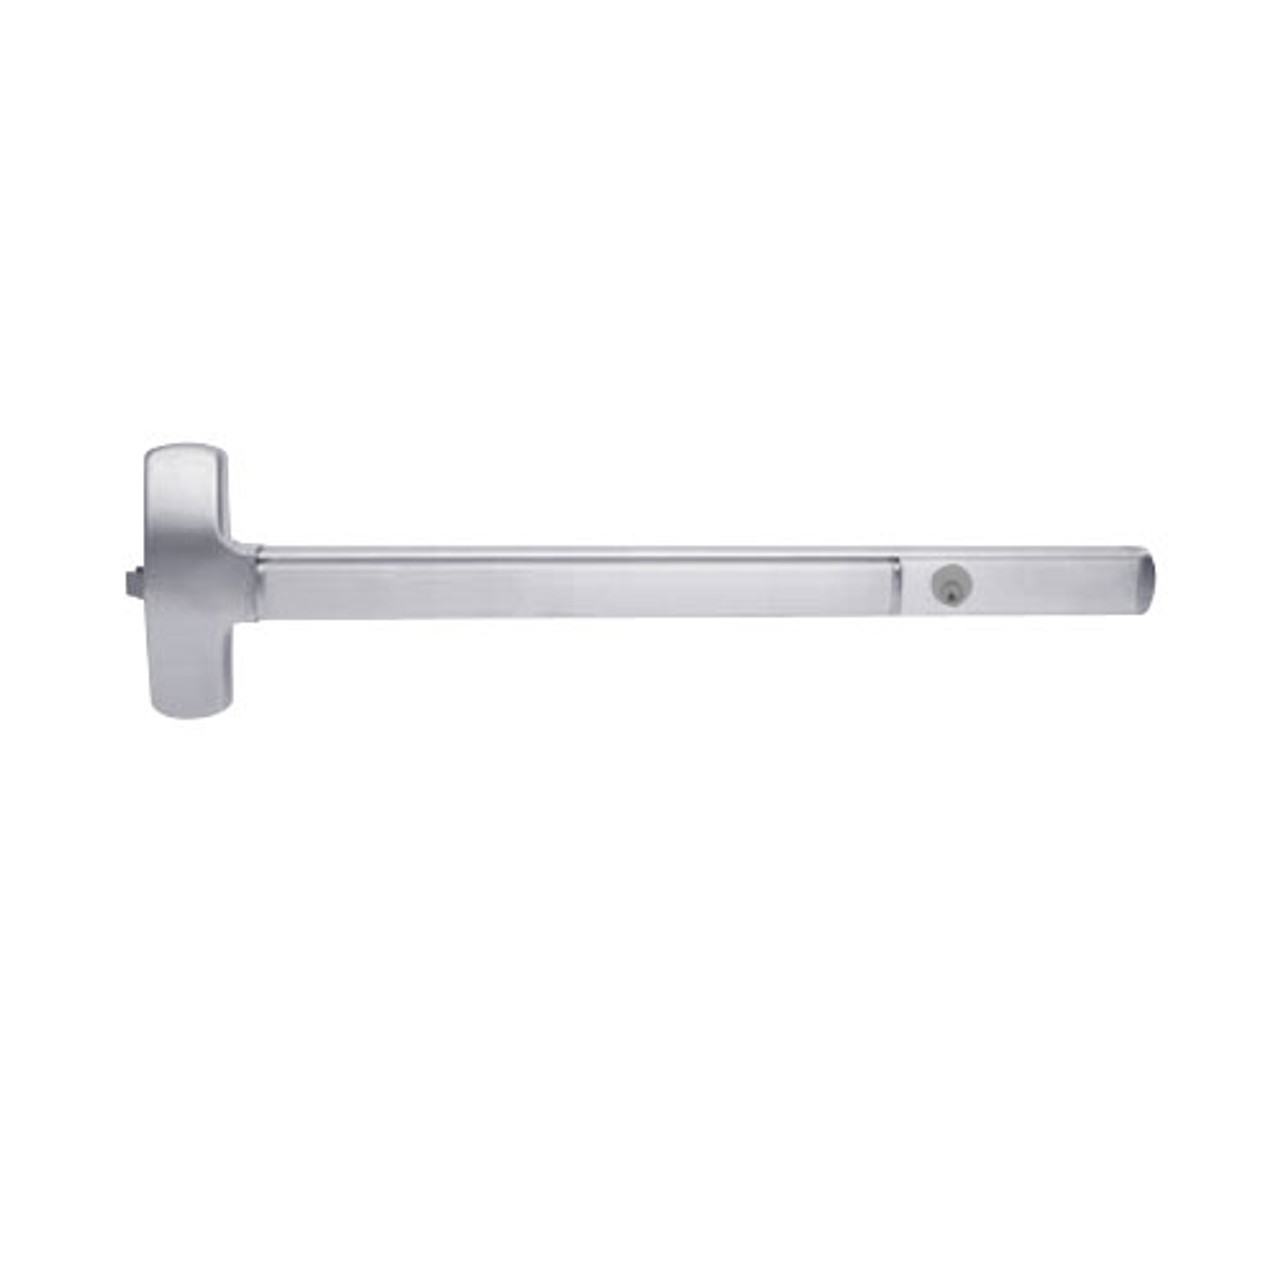 CD25-R-NL-OP-US32-4 Falcon Exit Device in Polished Stainless Steel